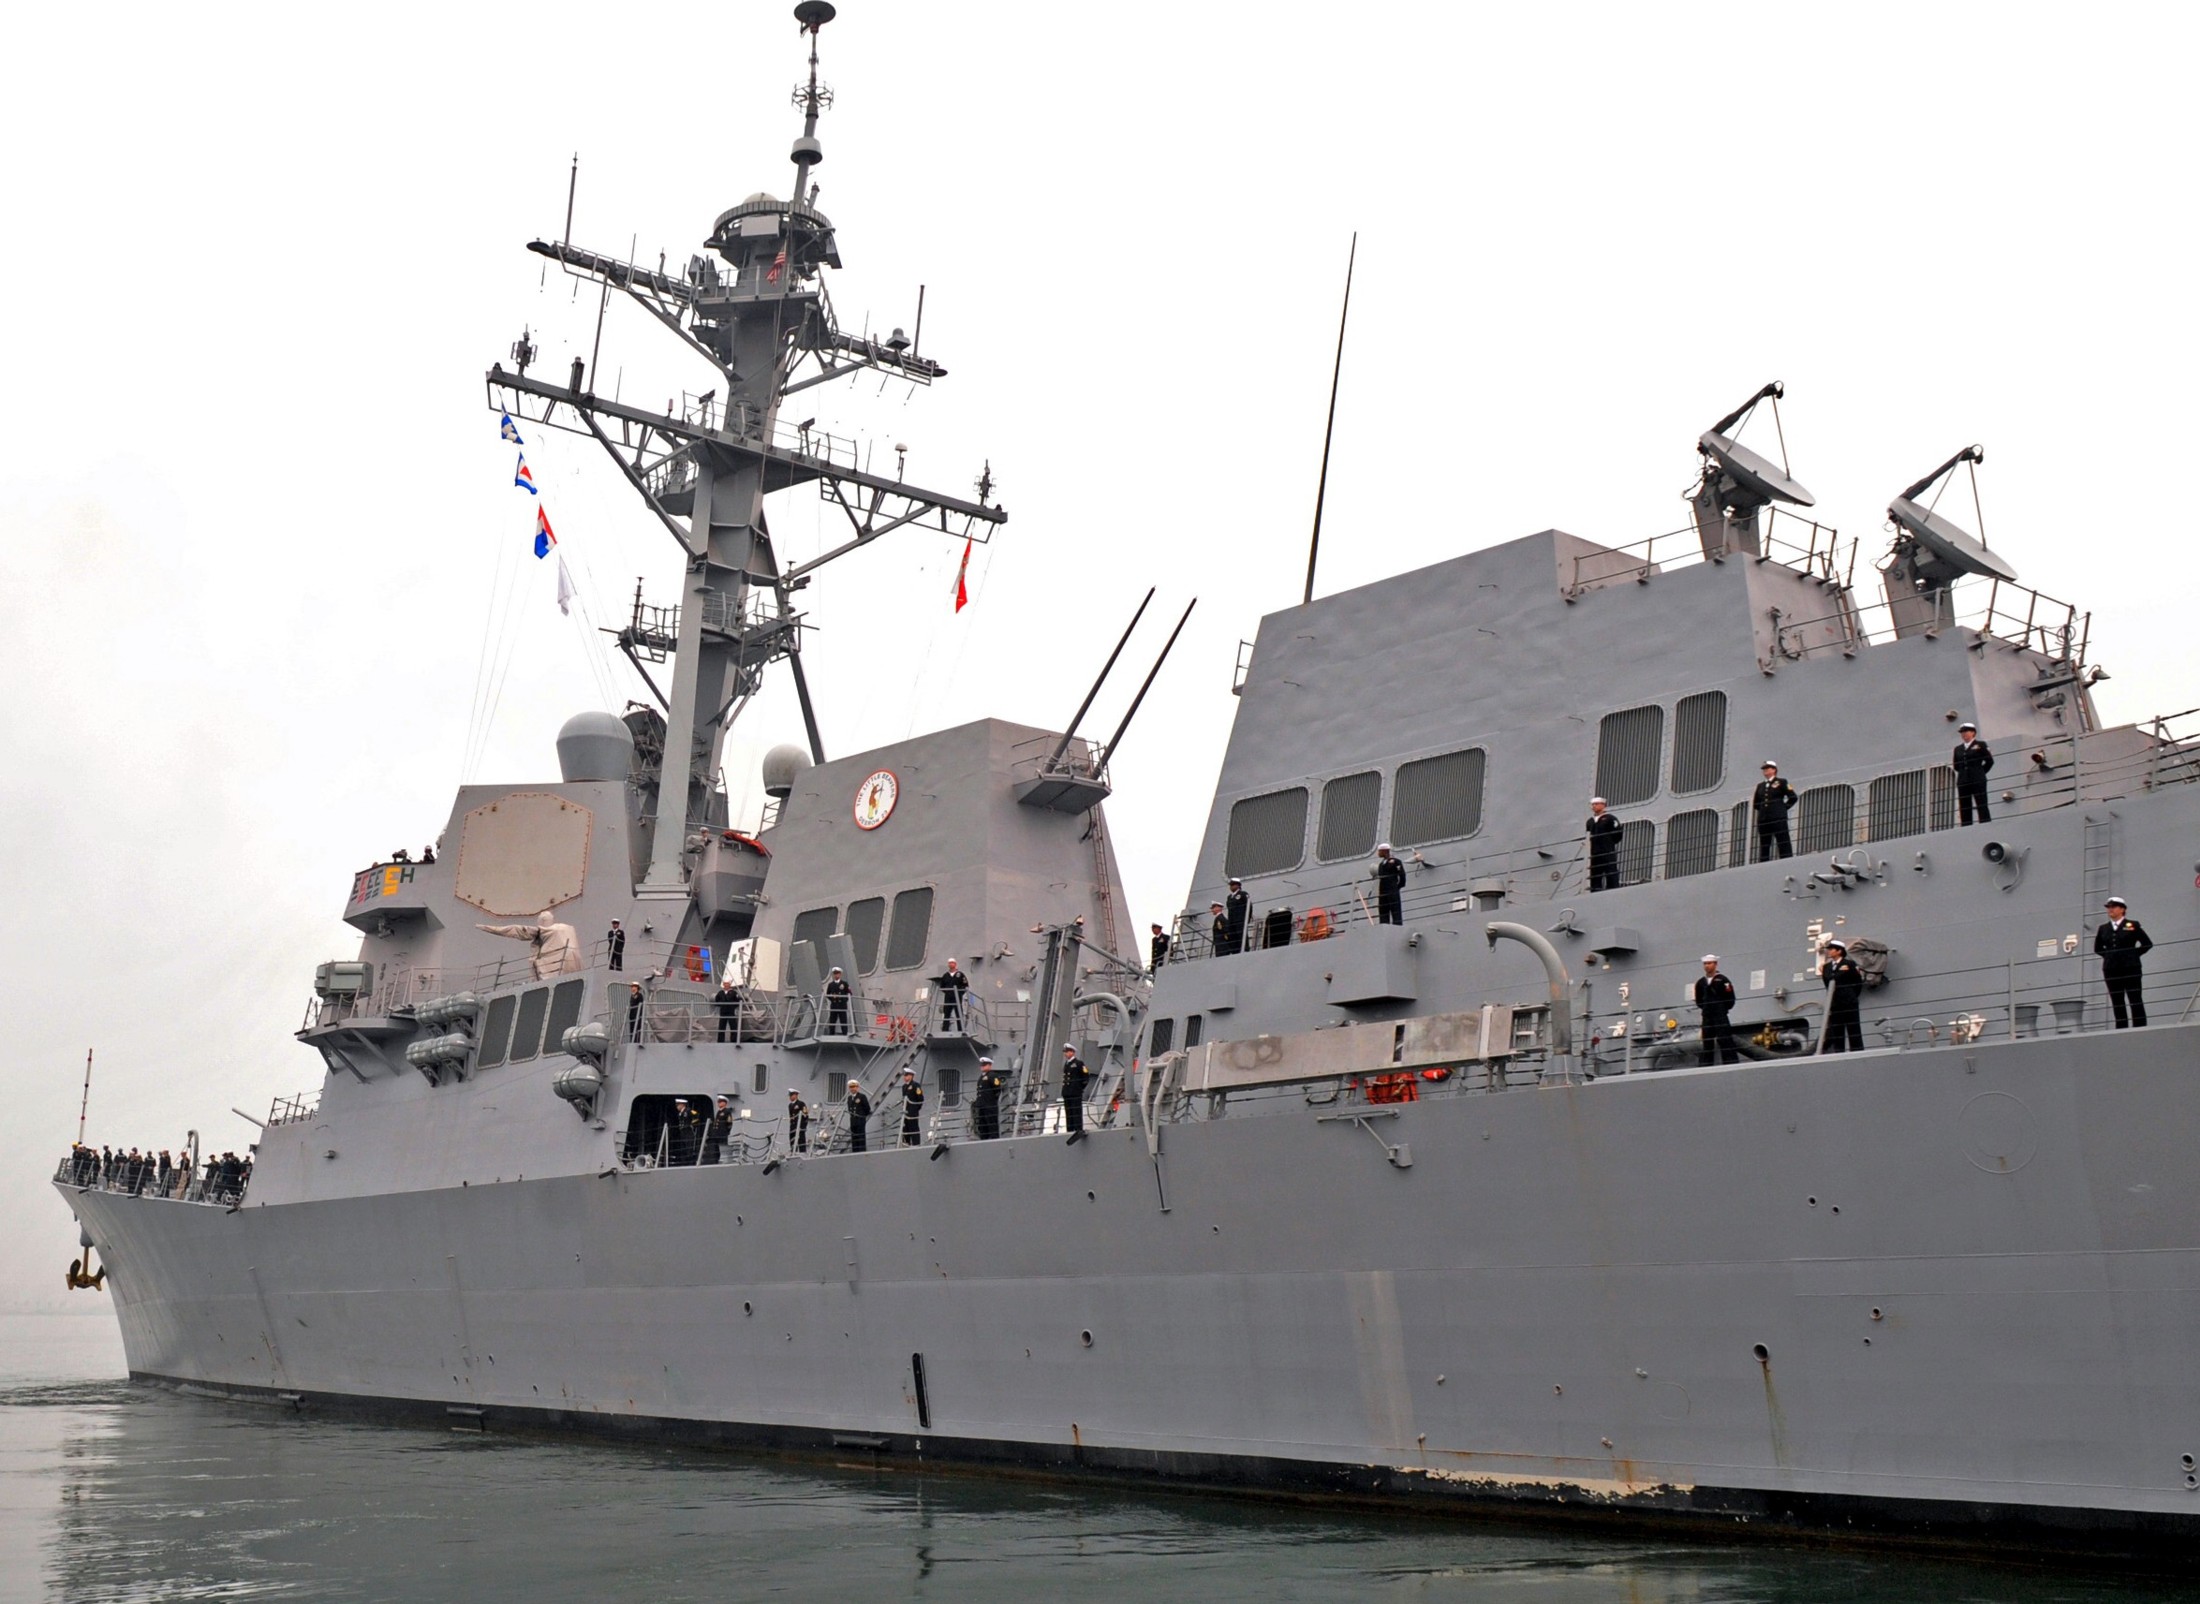 ddg-102 uss sampson guided missile destroyer 2012 22 san diego california